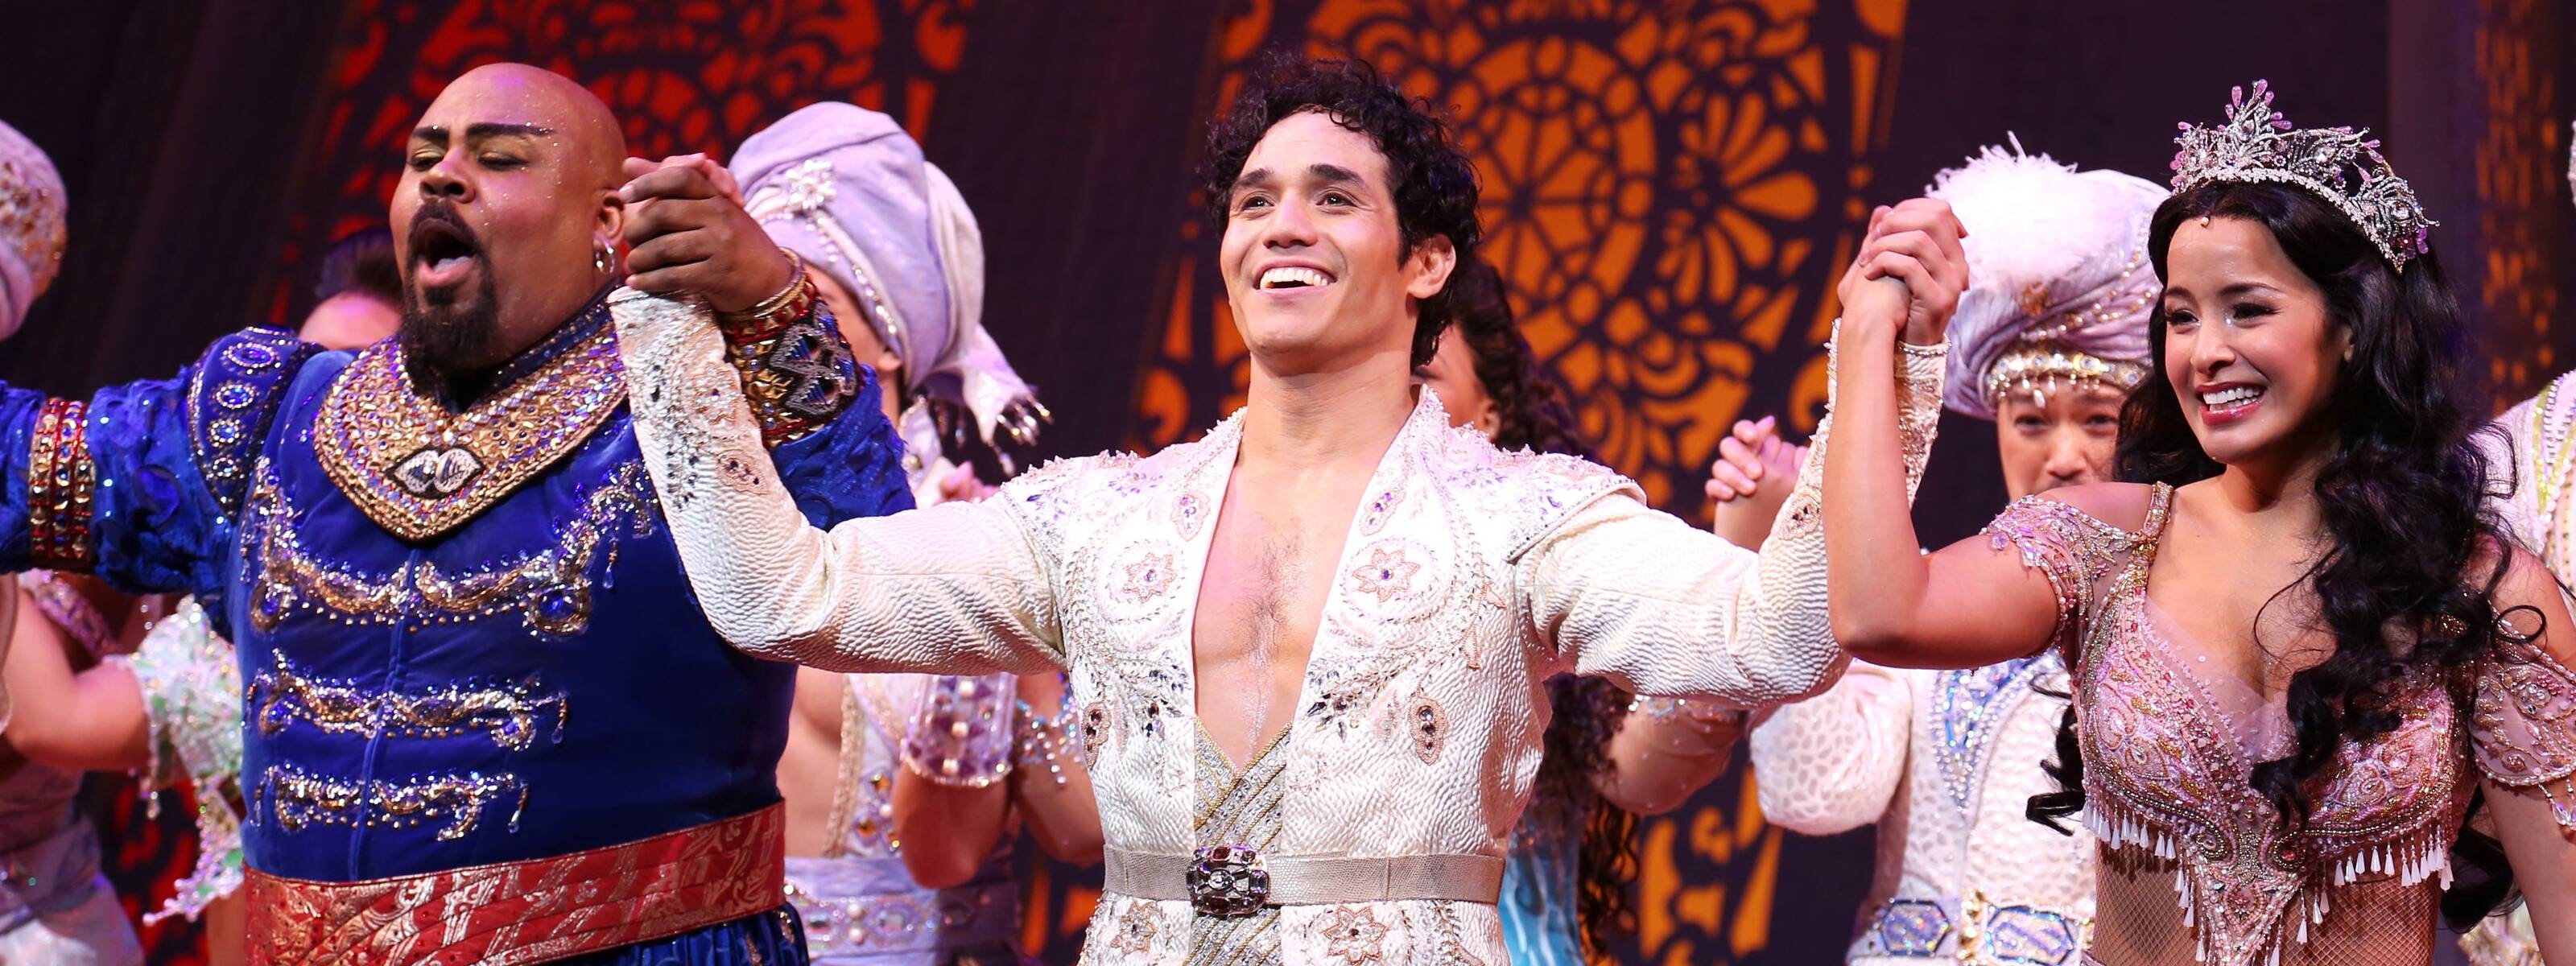 Buy the best VIP front row Cheap seats for Aladdin the musical on Broadway